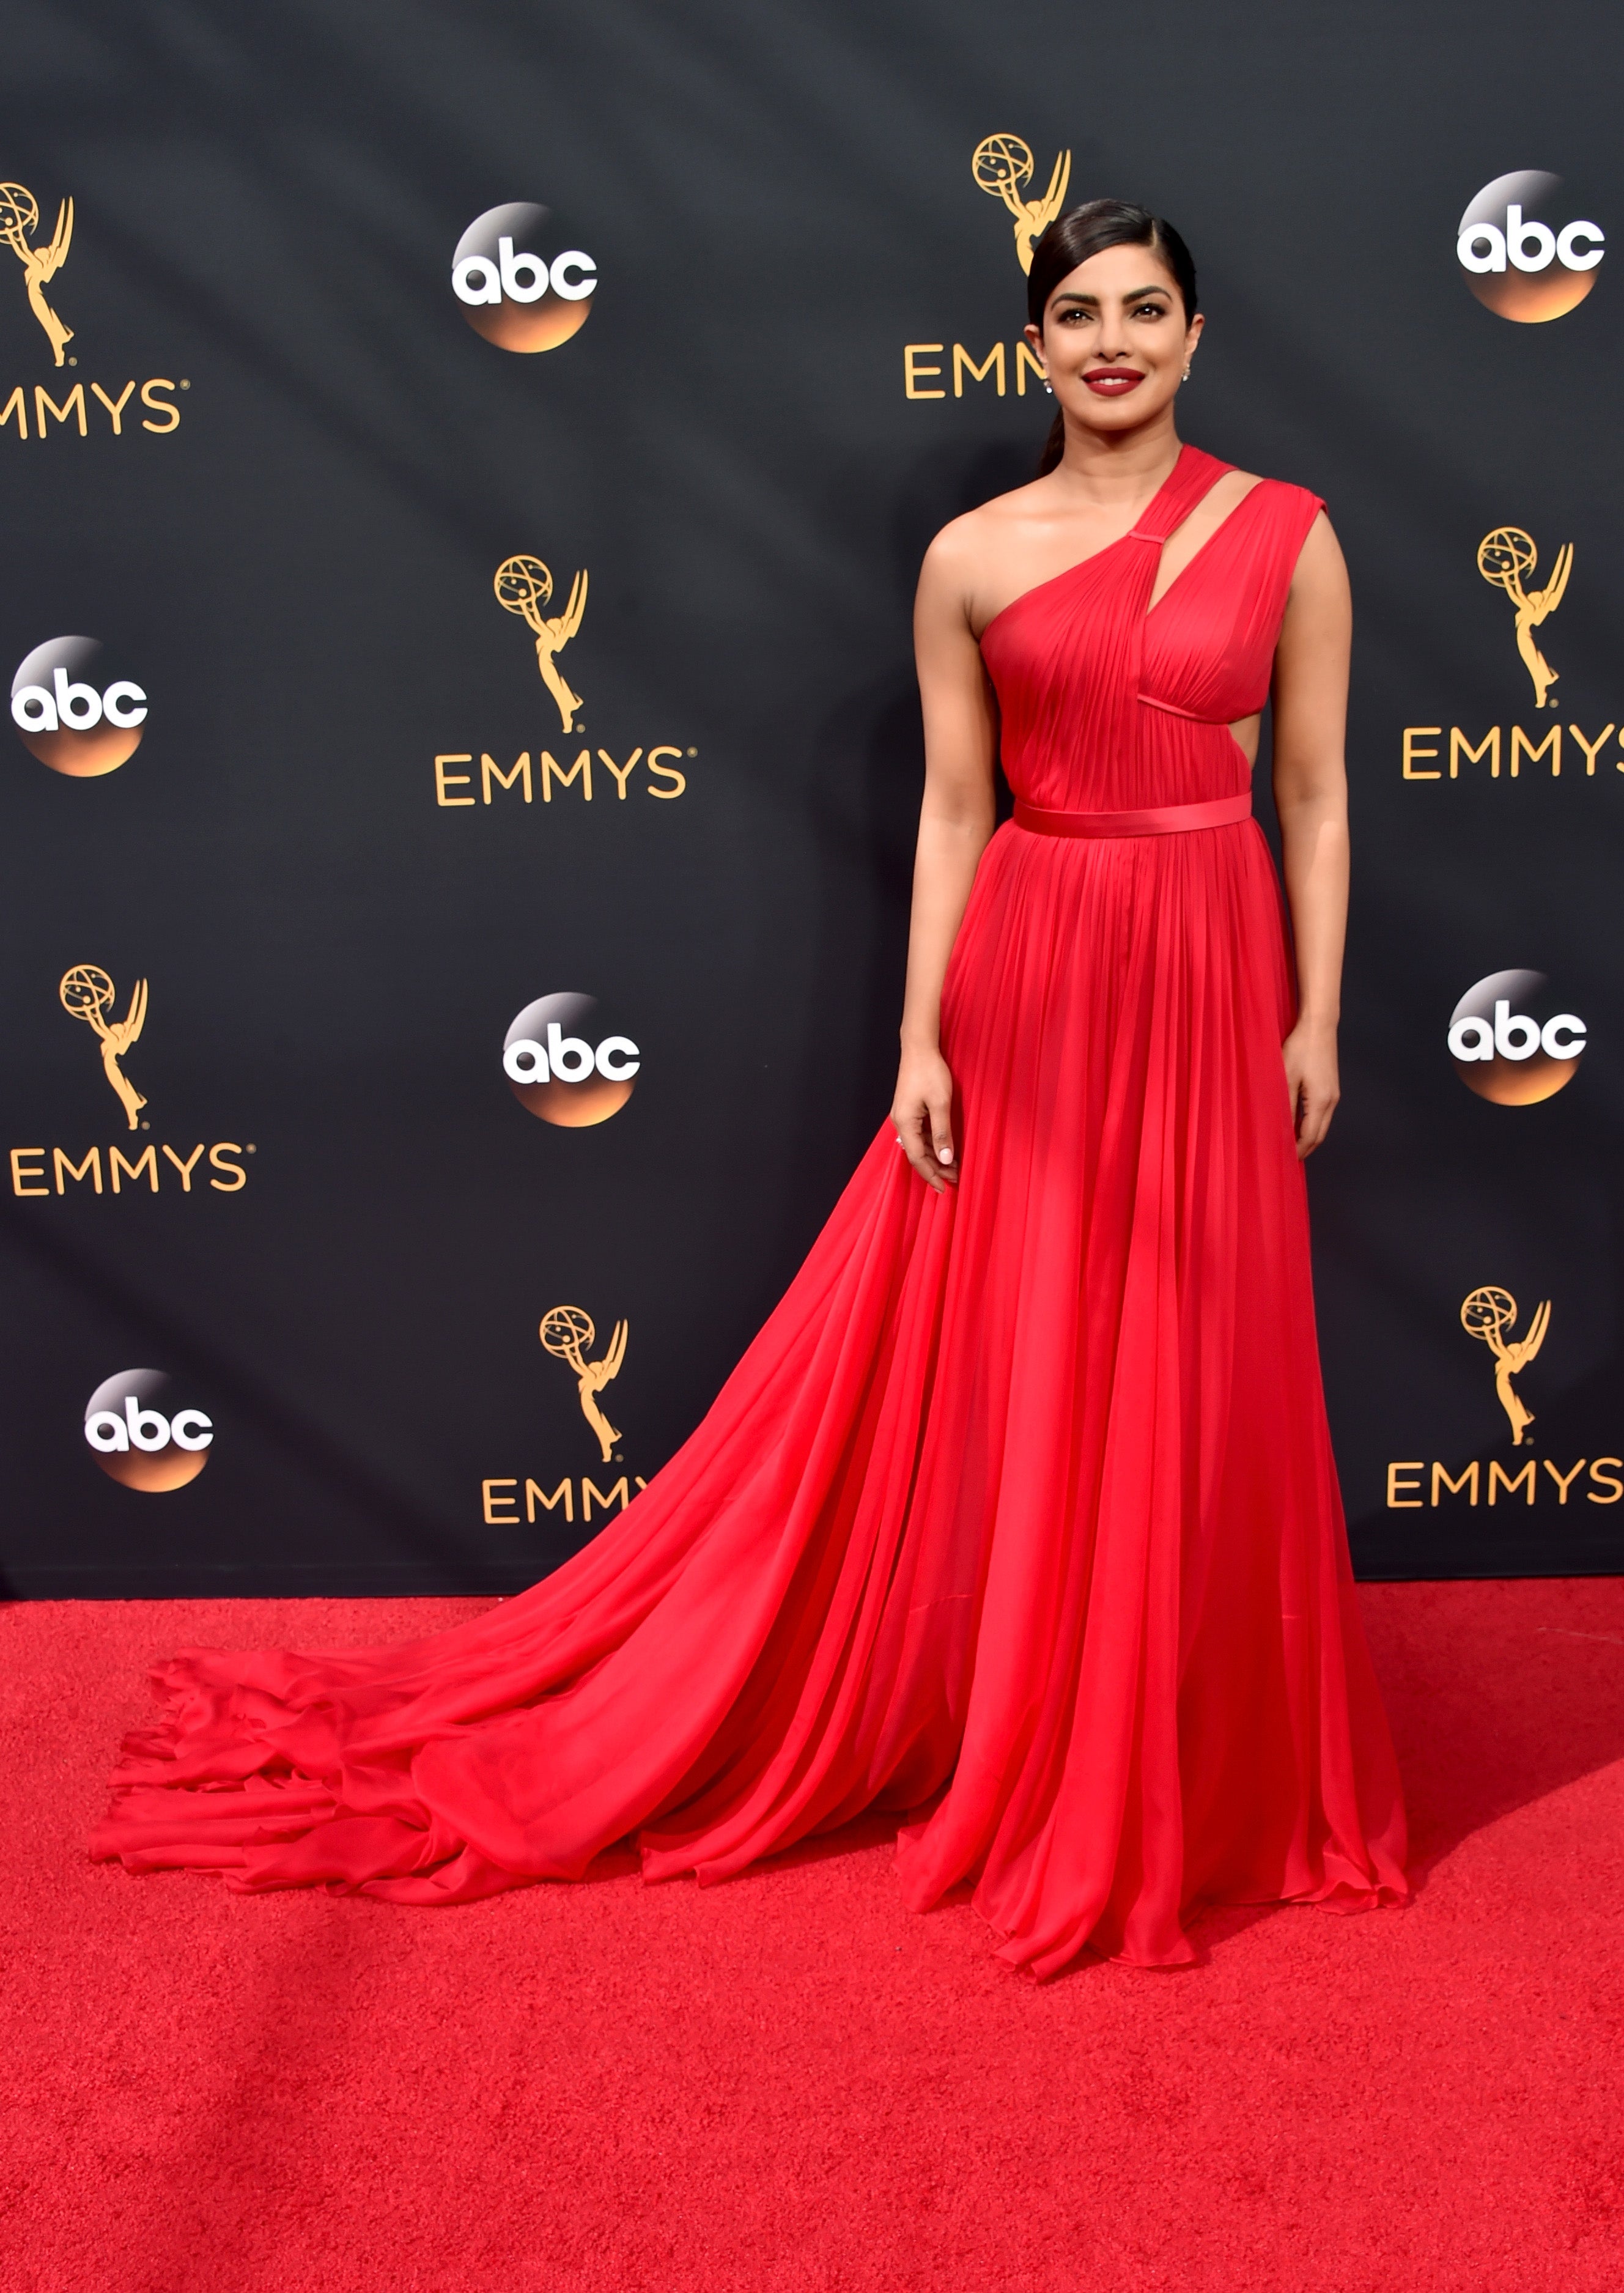 The 2016 Emmys Red Carpet is On Another Level
